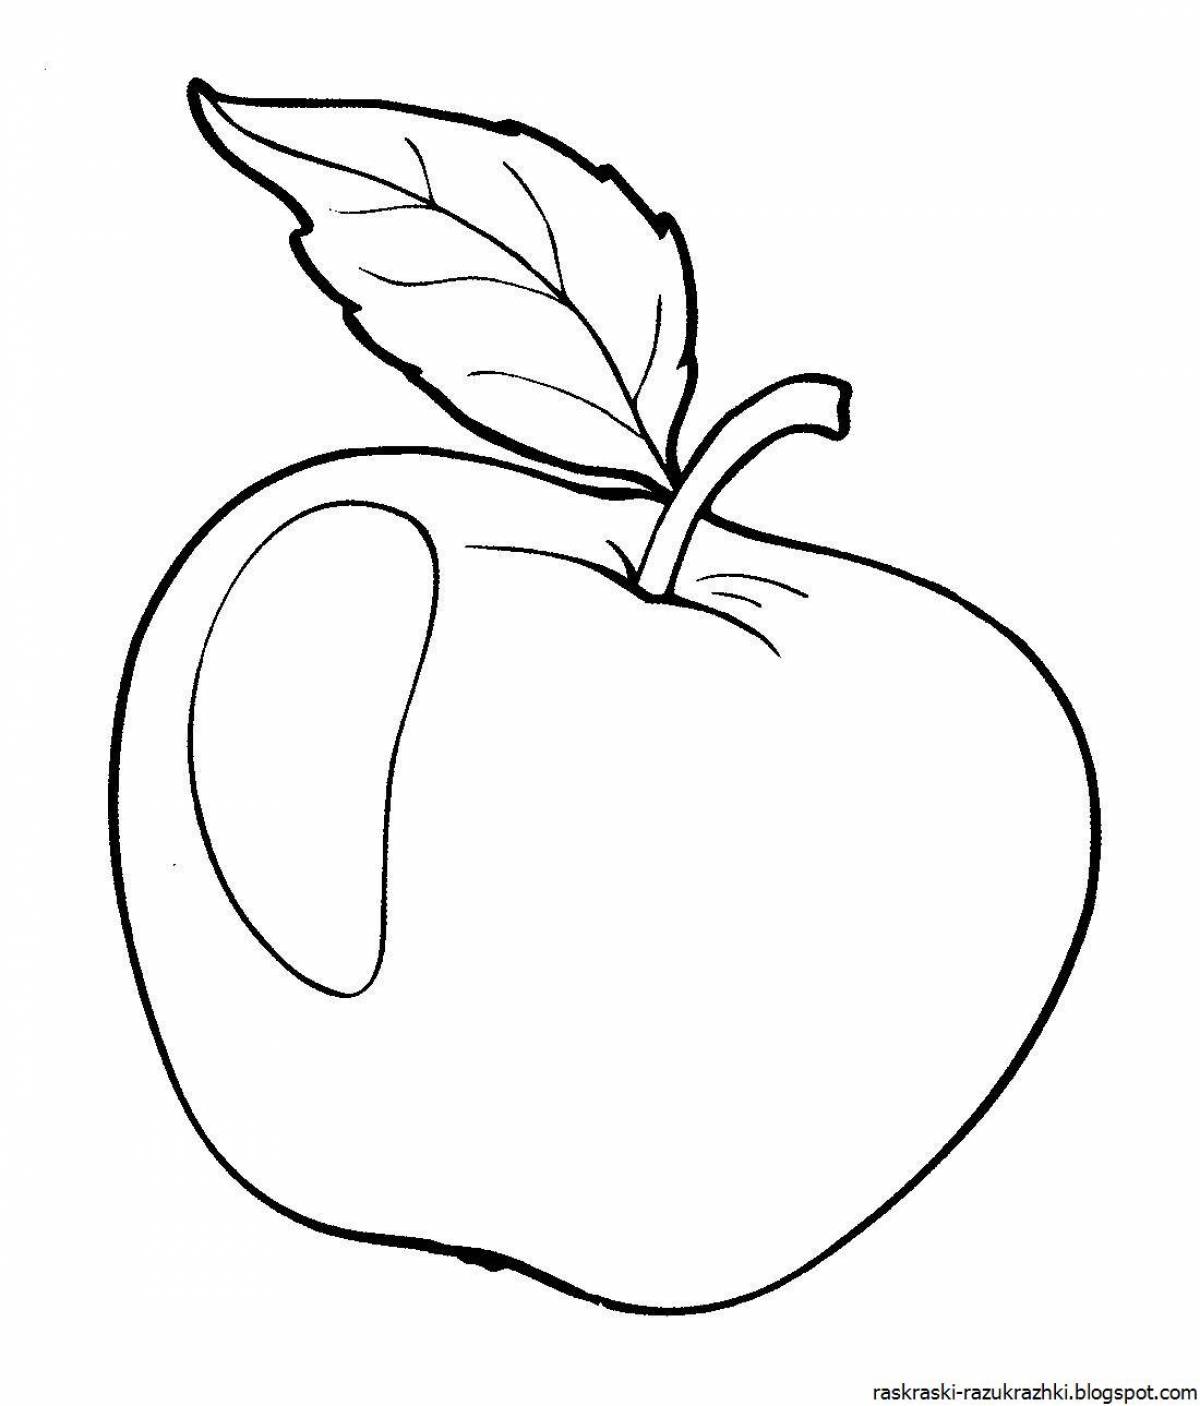 Fantastic fruit coloring book for 3-4 year olds